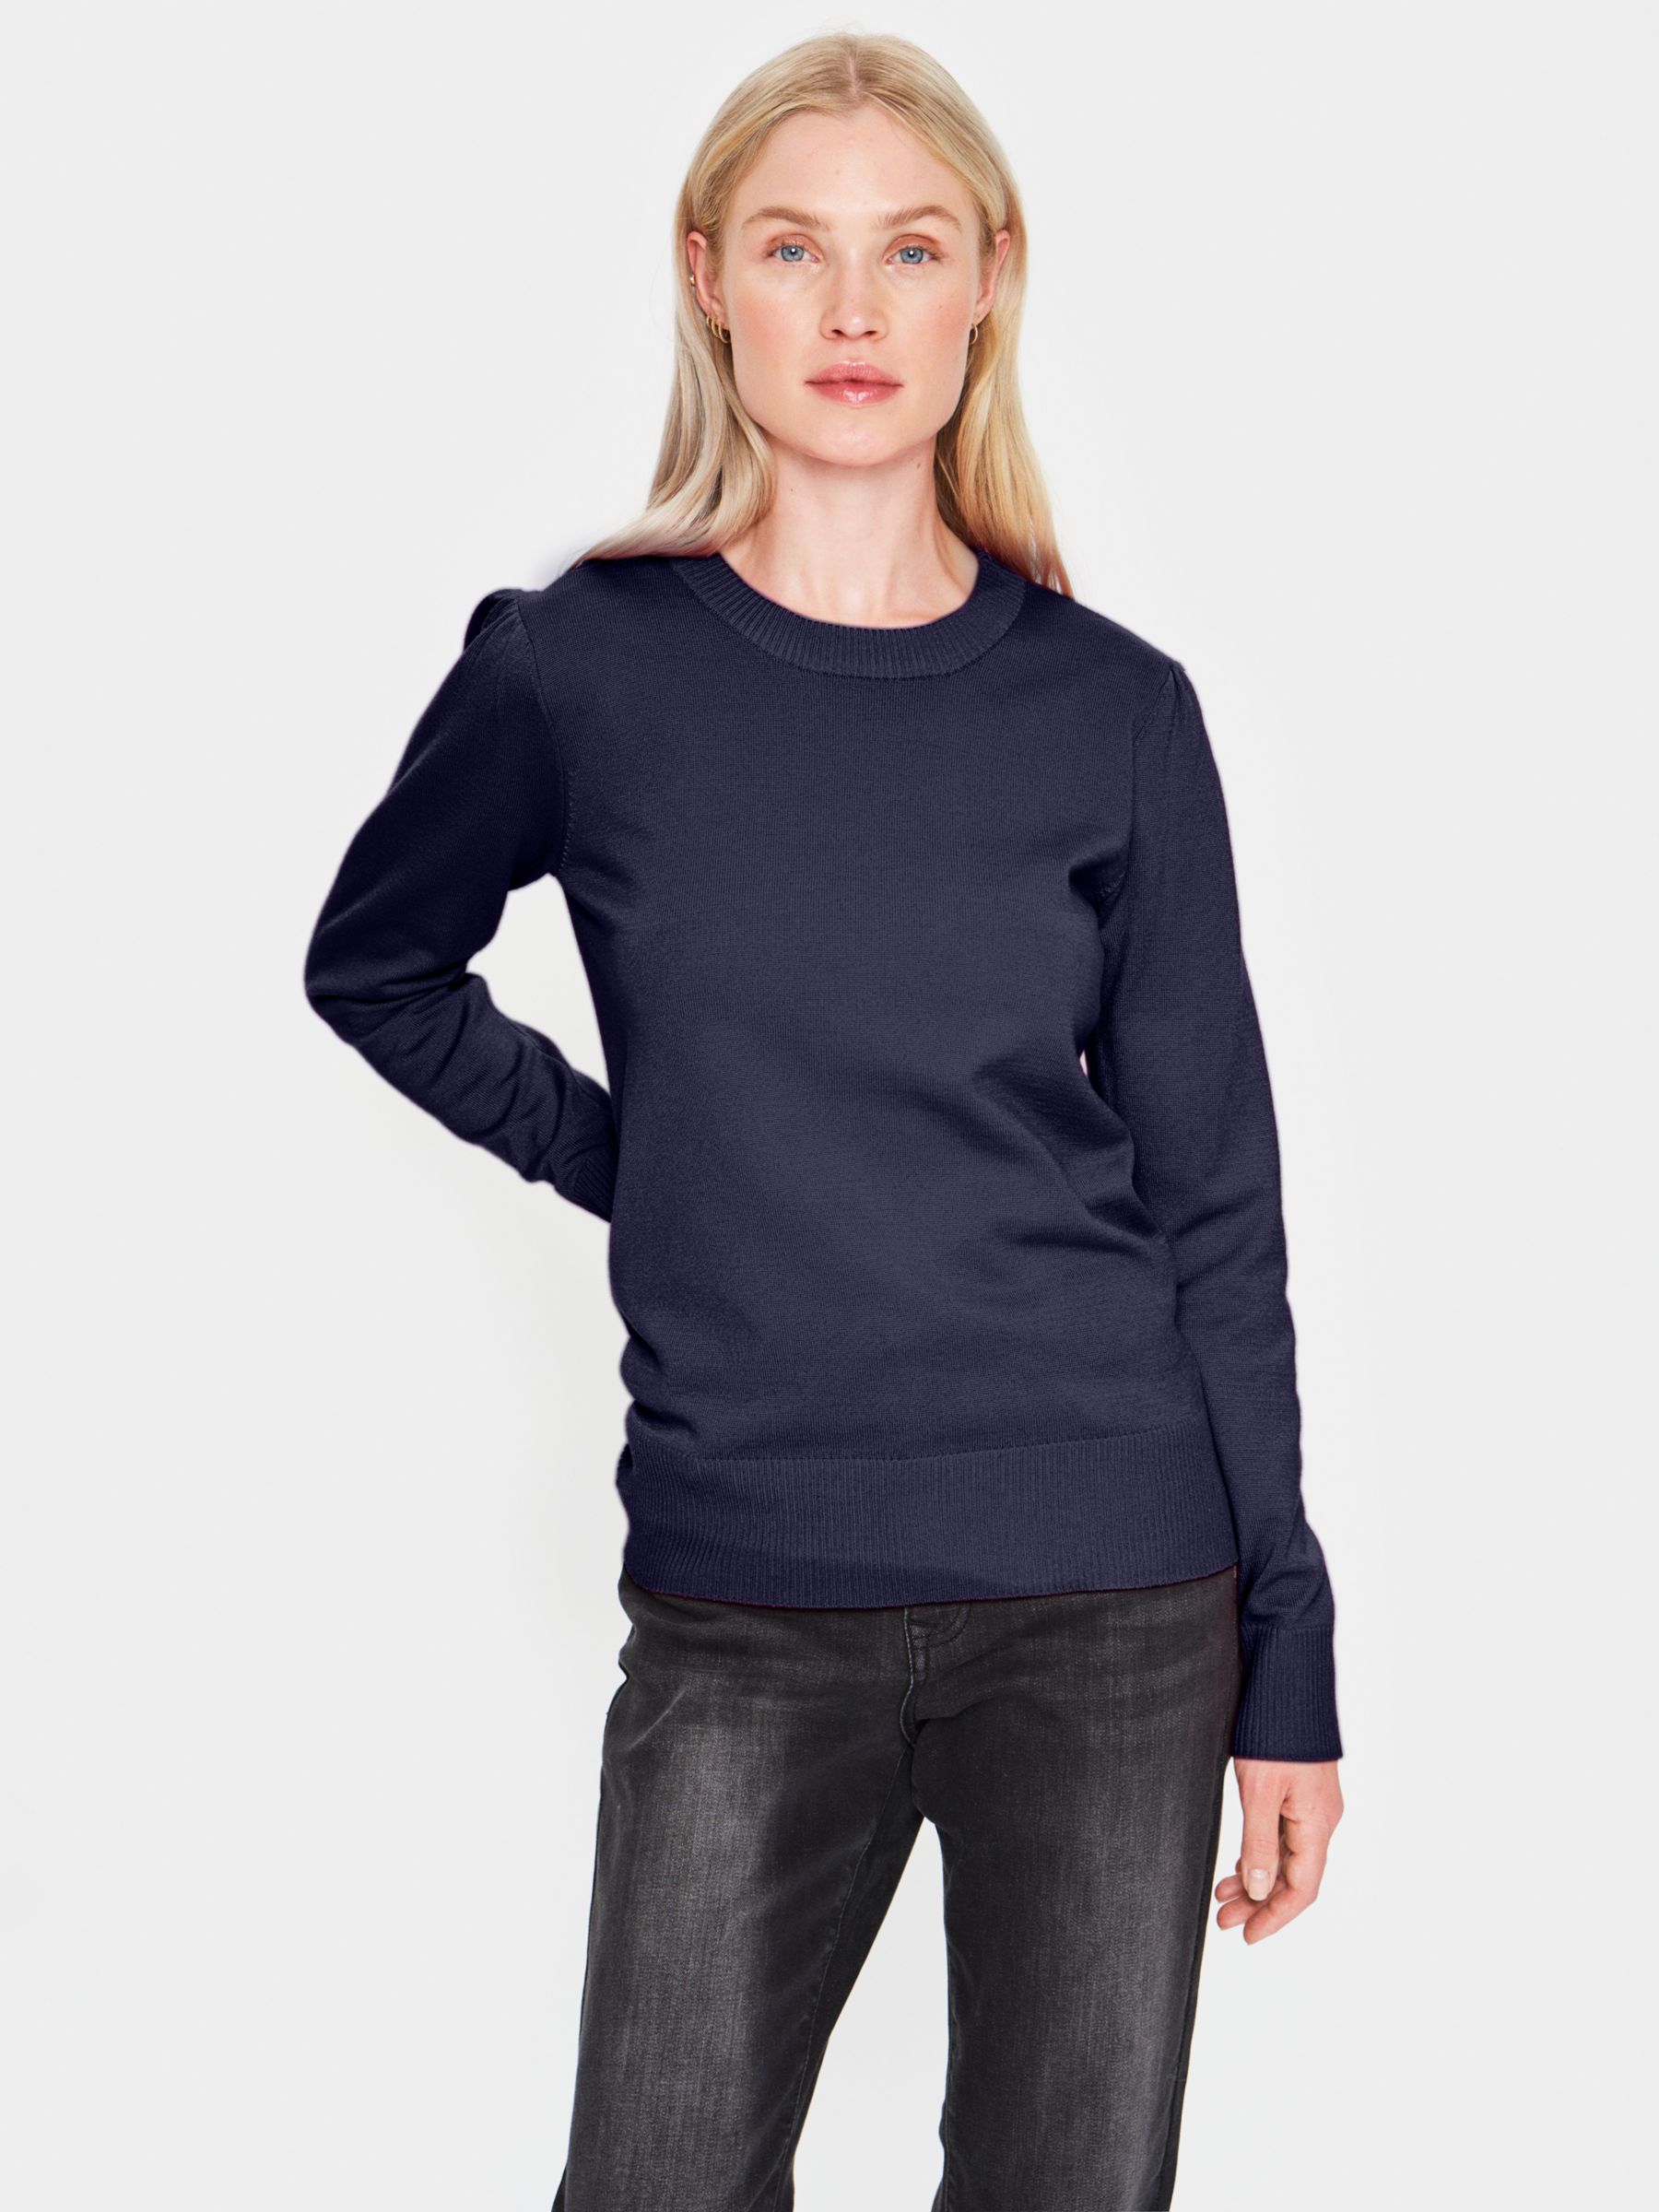 Saint Tropez Mila Knitted Pullover, Navy at John Lewis & Partners